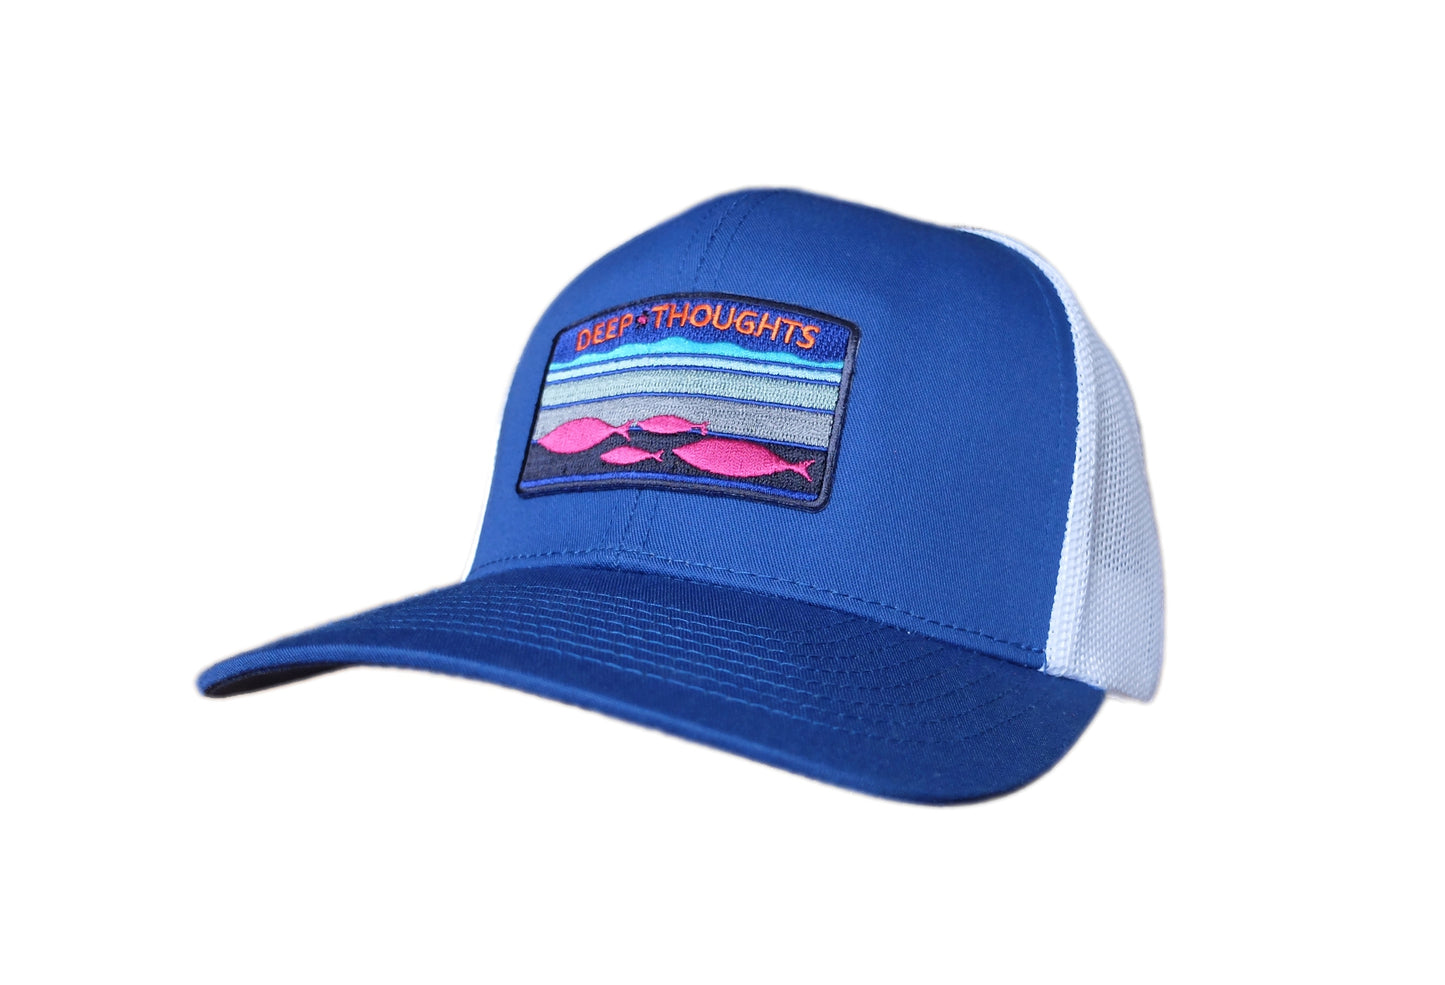 royal blue and white structured trucker cap with Deep Thoughts embroidered patch showing fish swimming in ocean currents